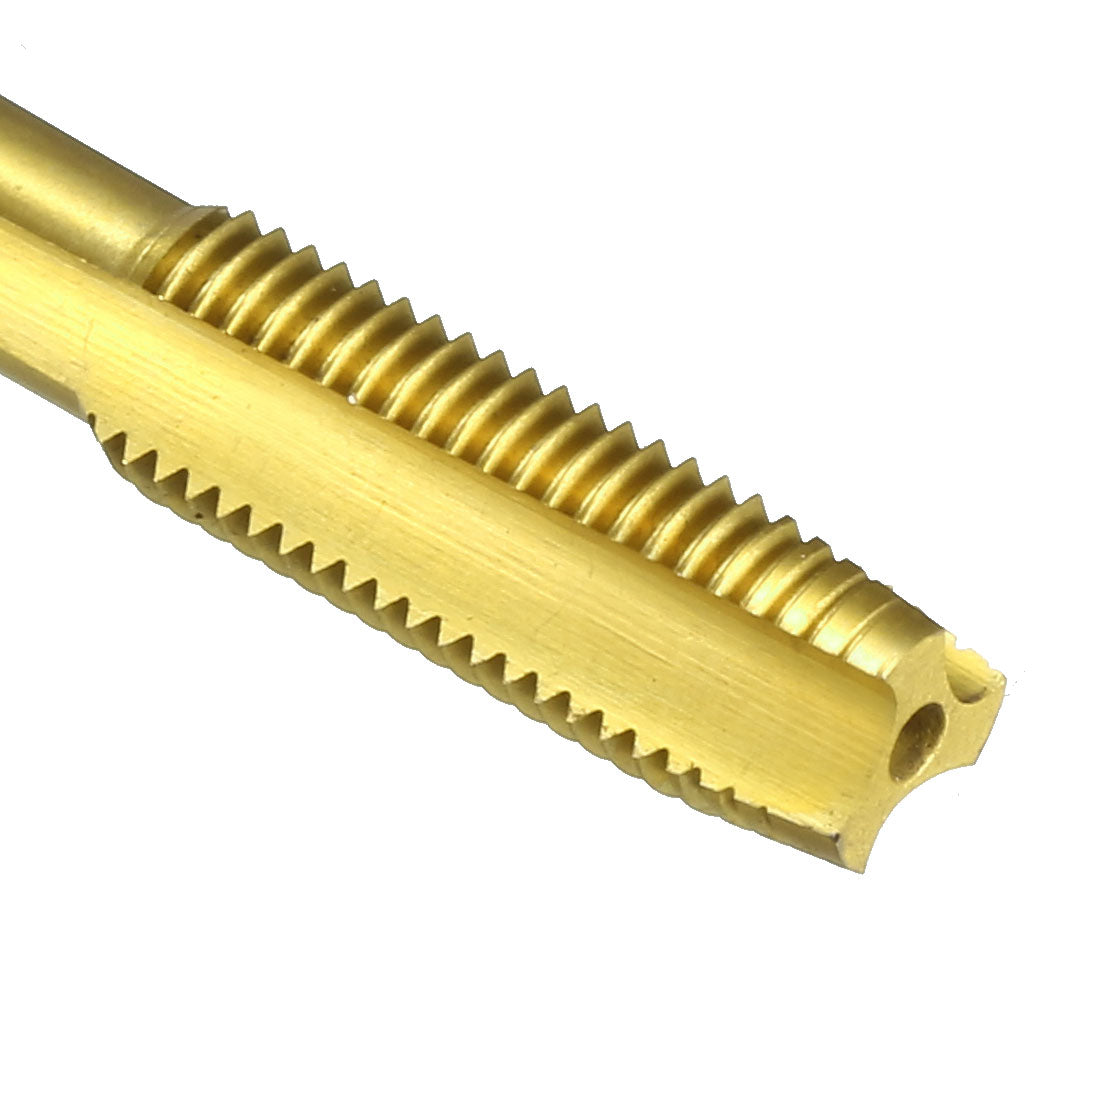 uxcell Uxcell Metric Tap M8 x 1 H2 Right Hand Thread Plug Ti-coated for Threading Tapping